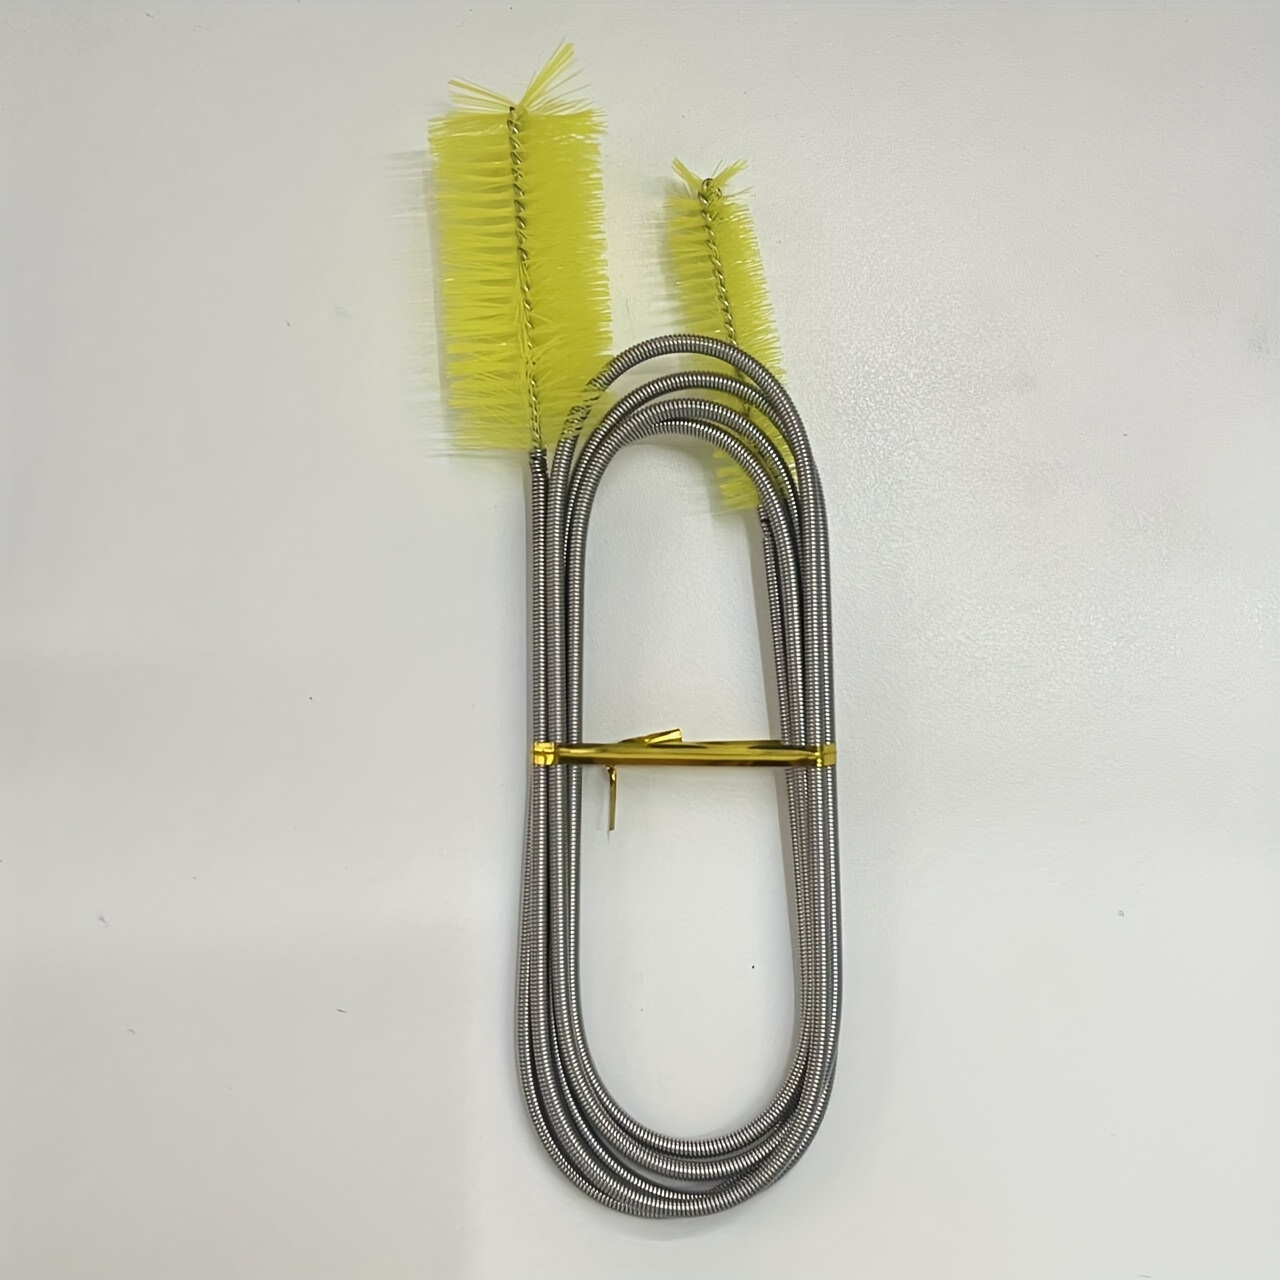 Stainless Steel Flexible Drain Cleaning Brush, Pipe Cleaners Brush